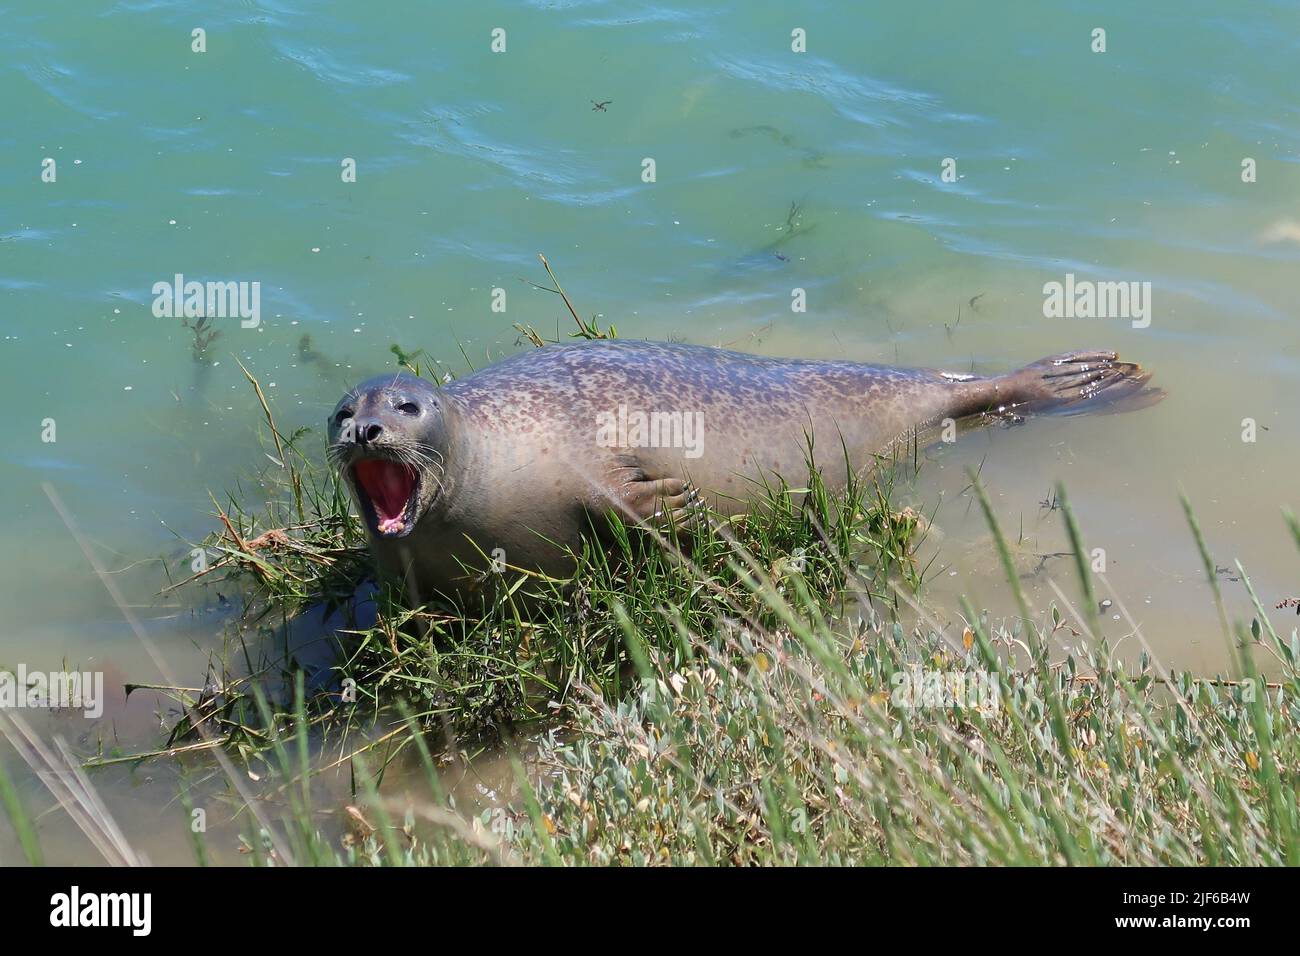 A large grey seal seen in the River Arun, West Sussex, UK. Unusual location 3 miles inland from the sea, but well known locally for several years. Stock Photo